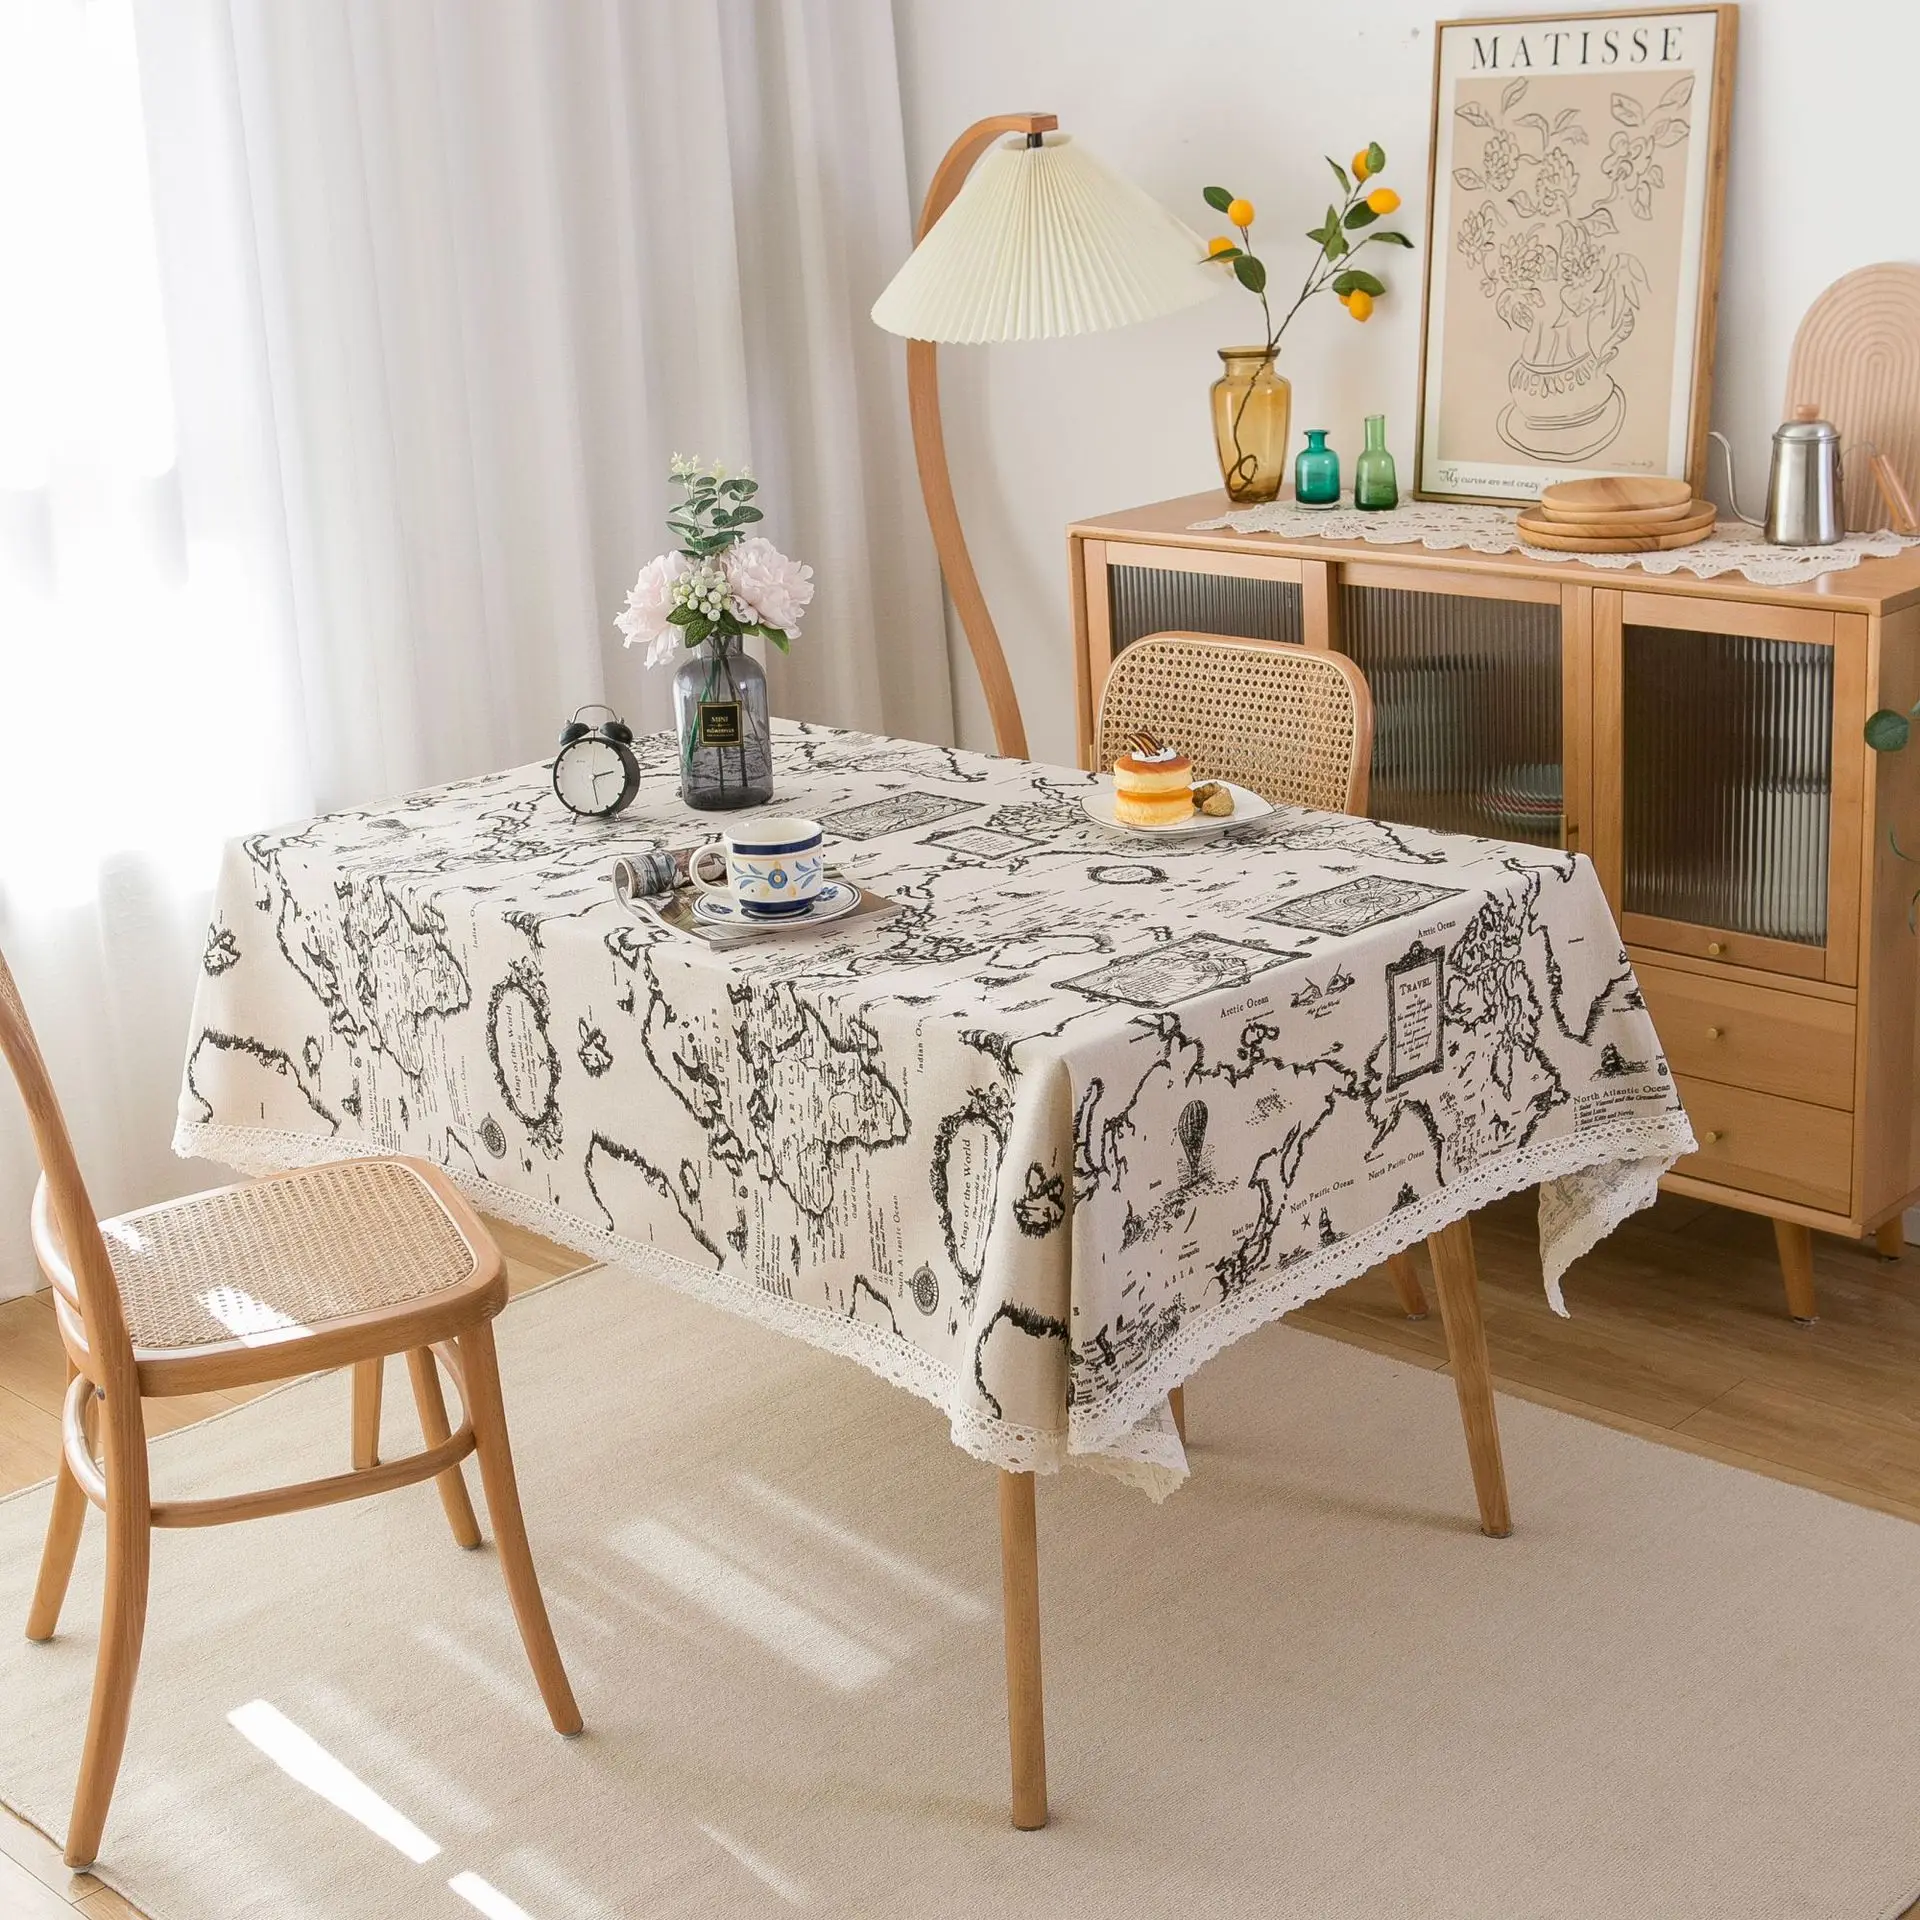 

Green Pine Tablecloths Stitching Tassel Table Cloth Rectangle Tablecloth Cotton Linen Waterproof Burlap Dining Tables Mat Cloths